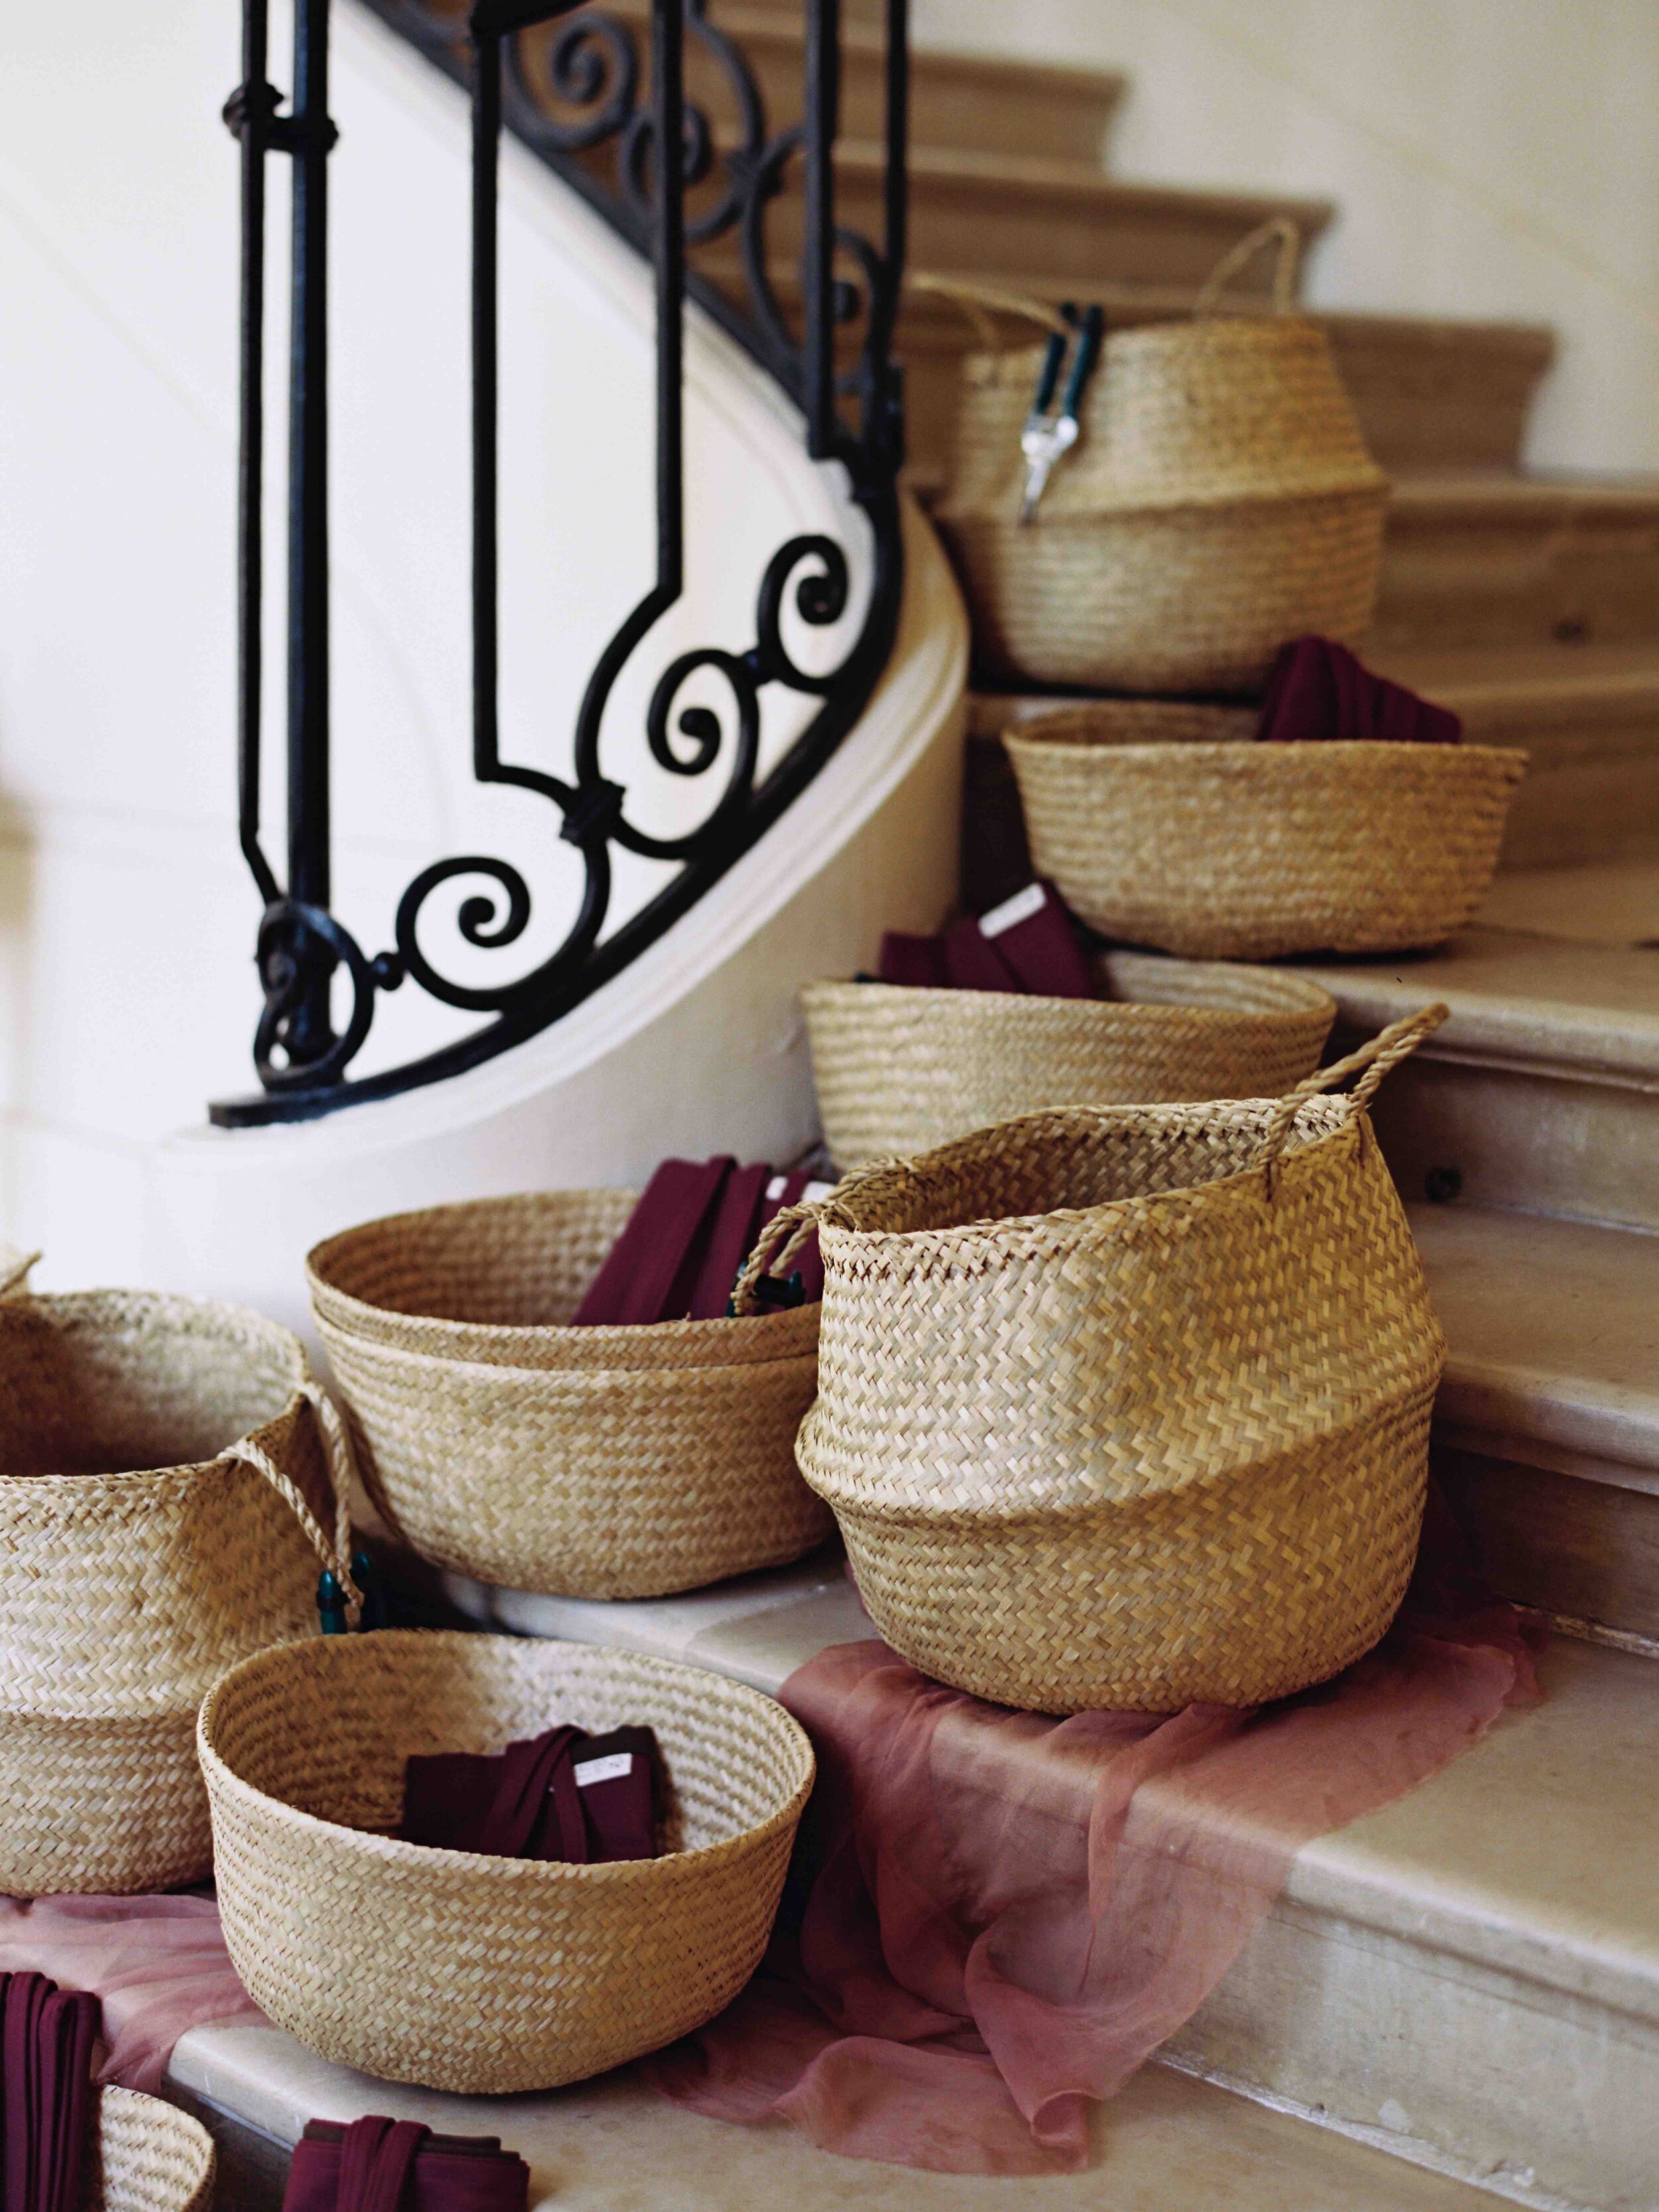 Wicker baskets lined up on a staircase during the Ponderosa Thyme workshop.